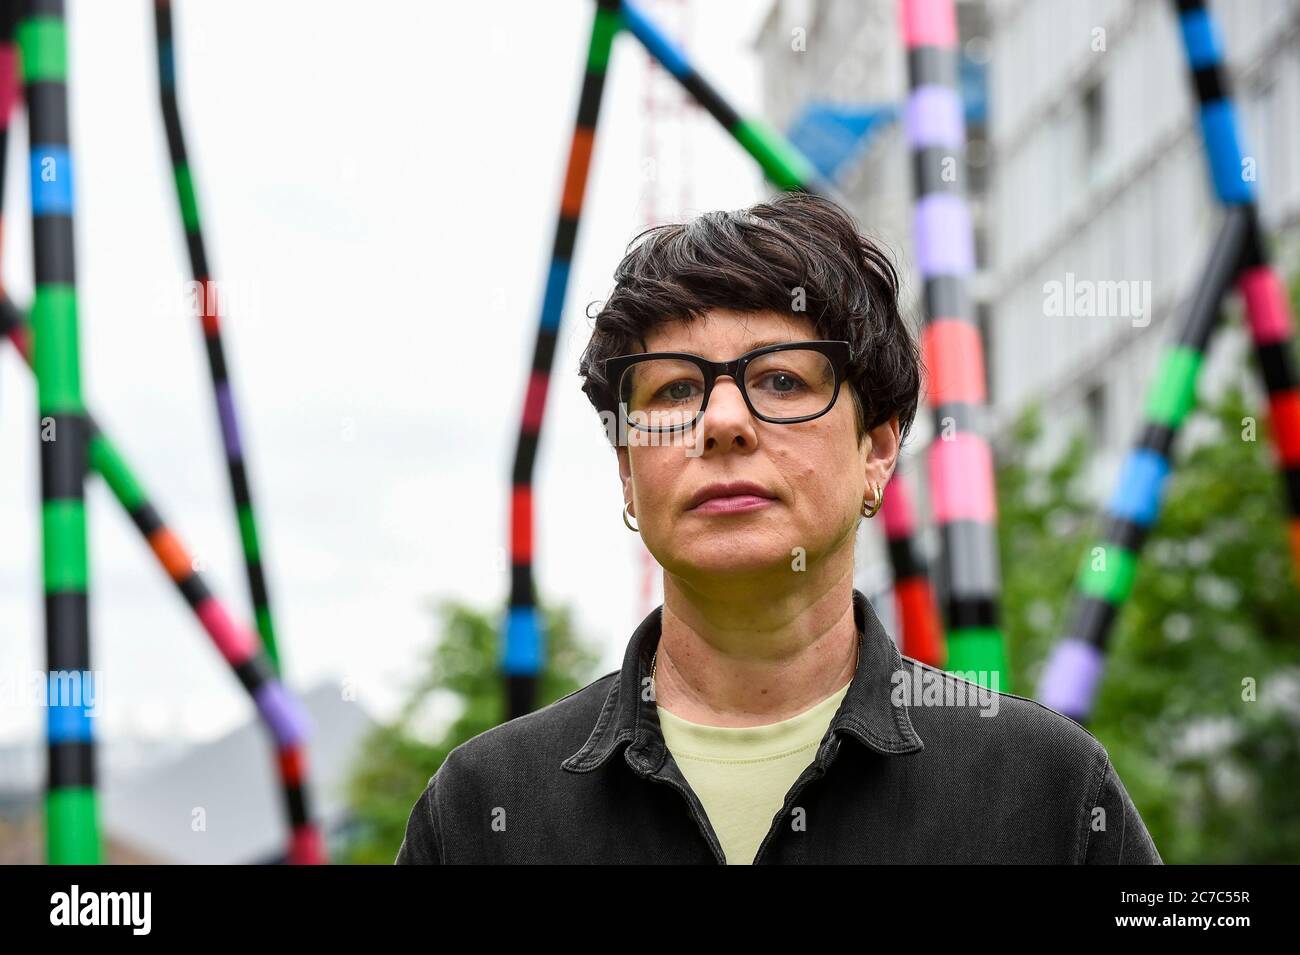 London, UK.  16 July 2020. Major contemporary London-based, Irish artist Eva Rothschild poses at the unveiling of her work 'My World and Your World.  The new 16m high, public sculpture in Lewis Cubitt Park in King's Cross resembles a lightning bolt, painted in black, purple, pink, orange, green and red stripes.  The coronavirus lockdown caused the April 2020 launch to be postponed, but the unveiling has been able to go ahead now that certain lockdown restrictions have been eased by the UK government.  Credit: Stephen Chung / Alamy Live News Stock Photo